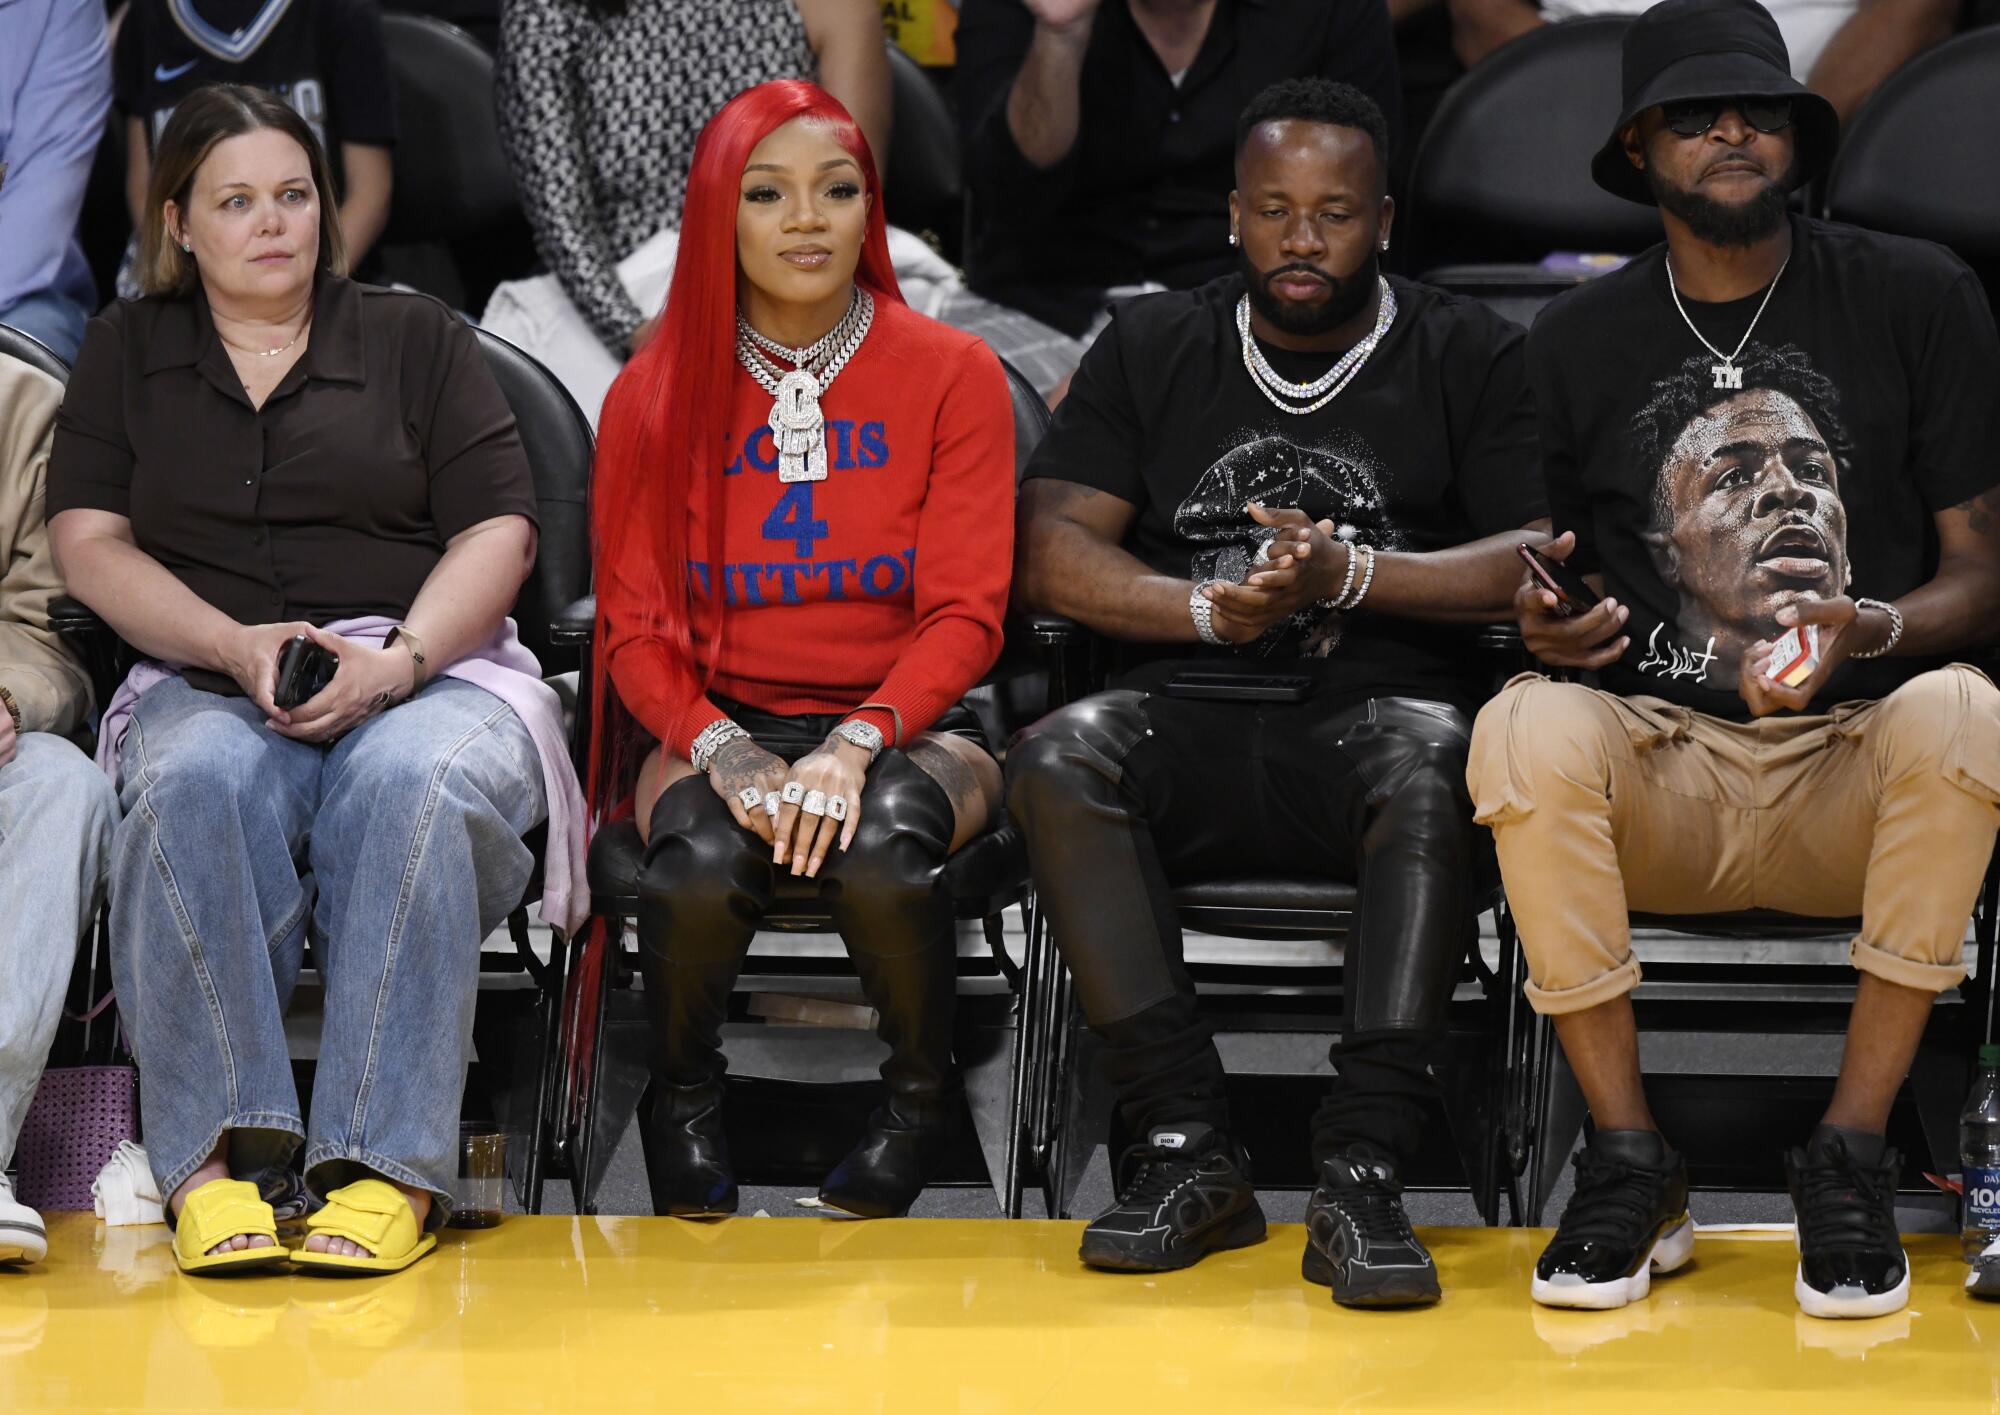 Rapper GloRilla, second from left, attends a basketball game.